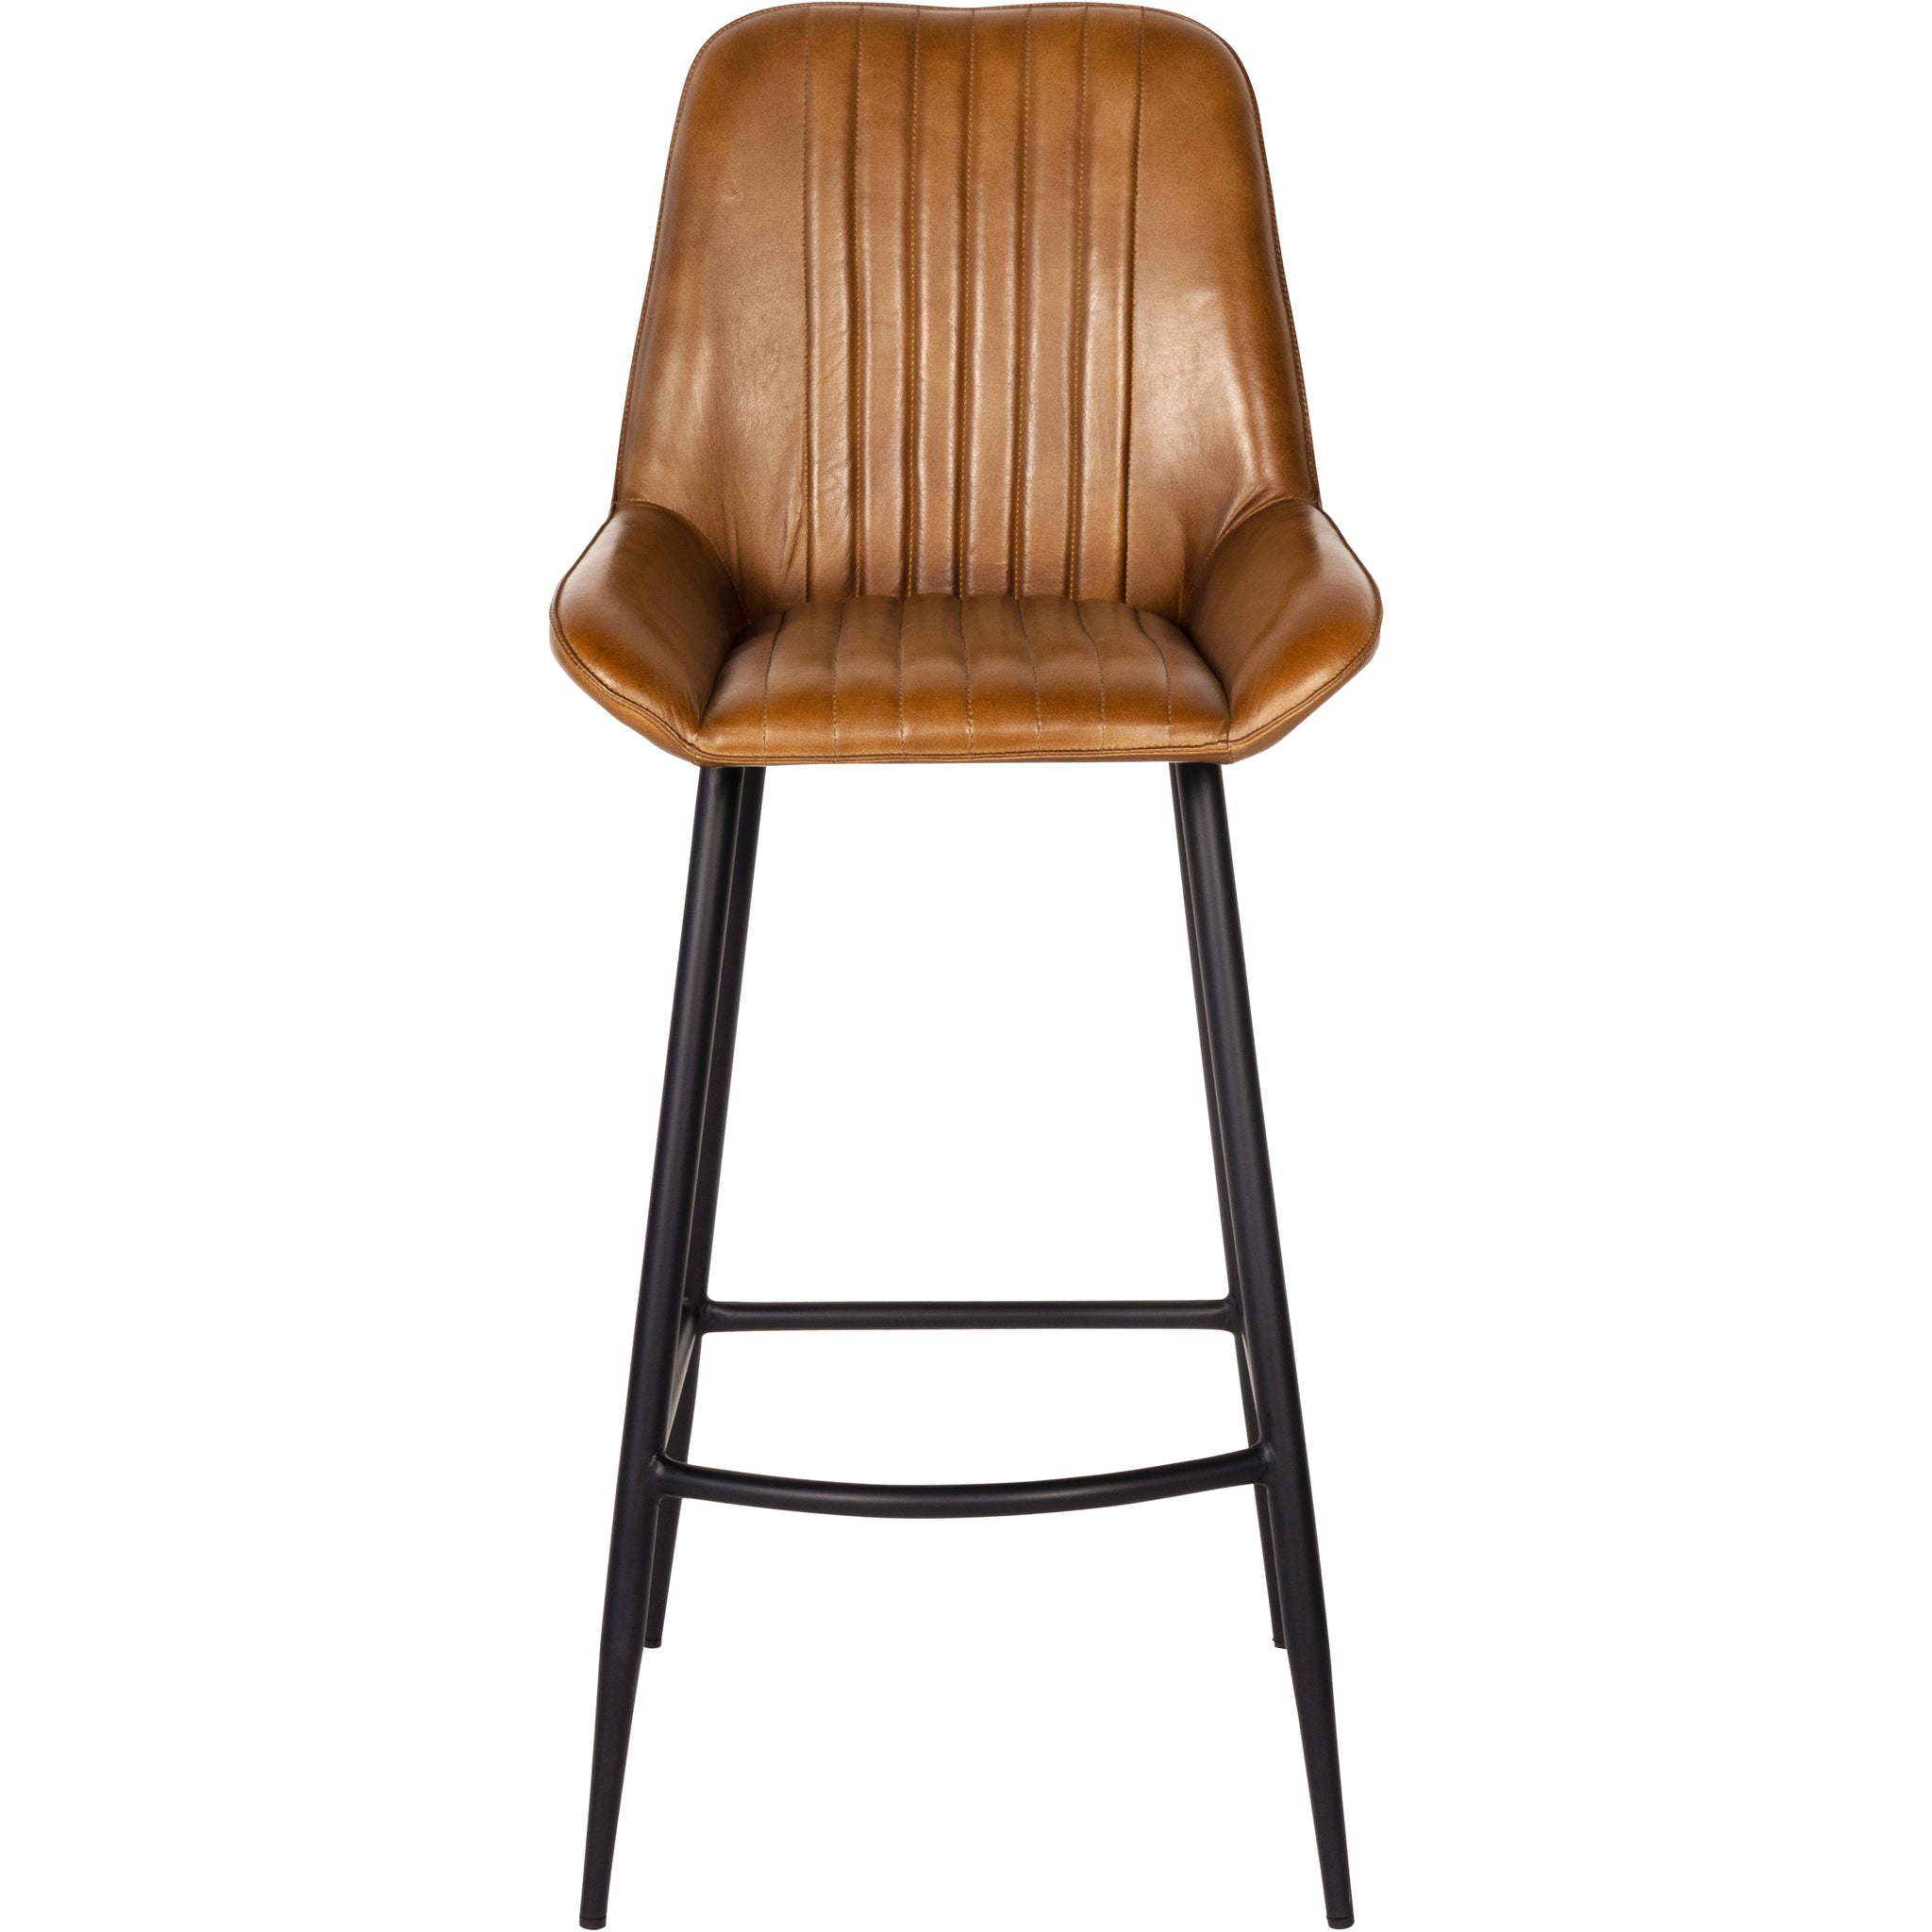 Set of 2 Boston Leather Bar Stools in Cognac